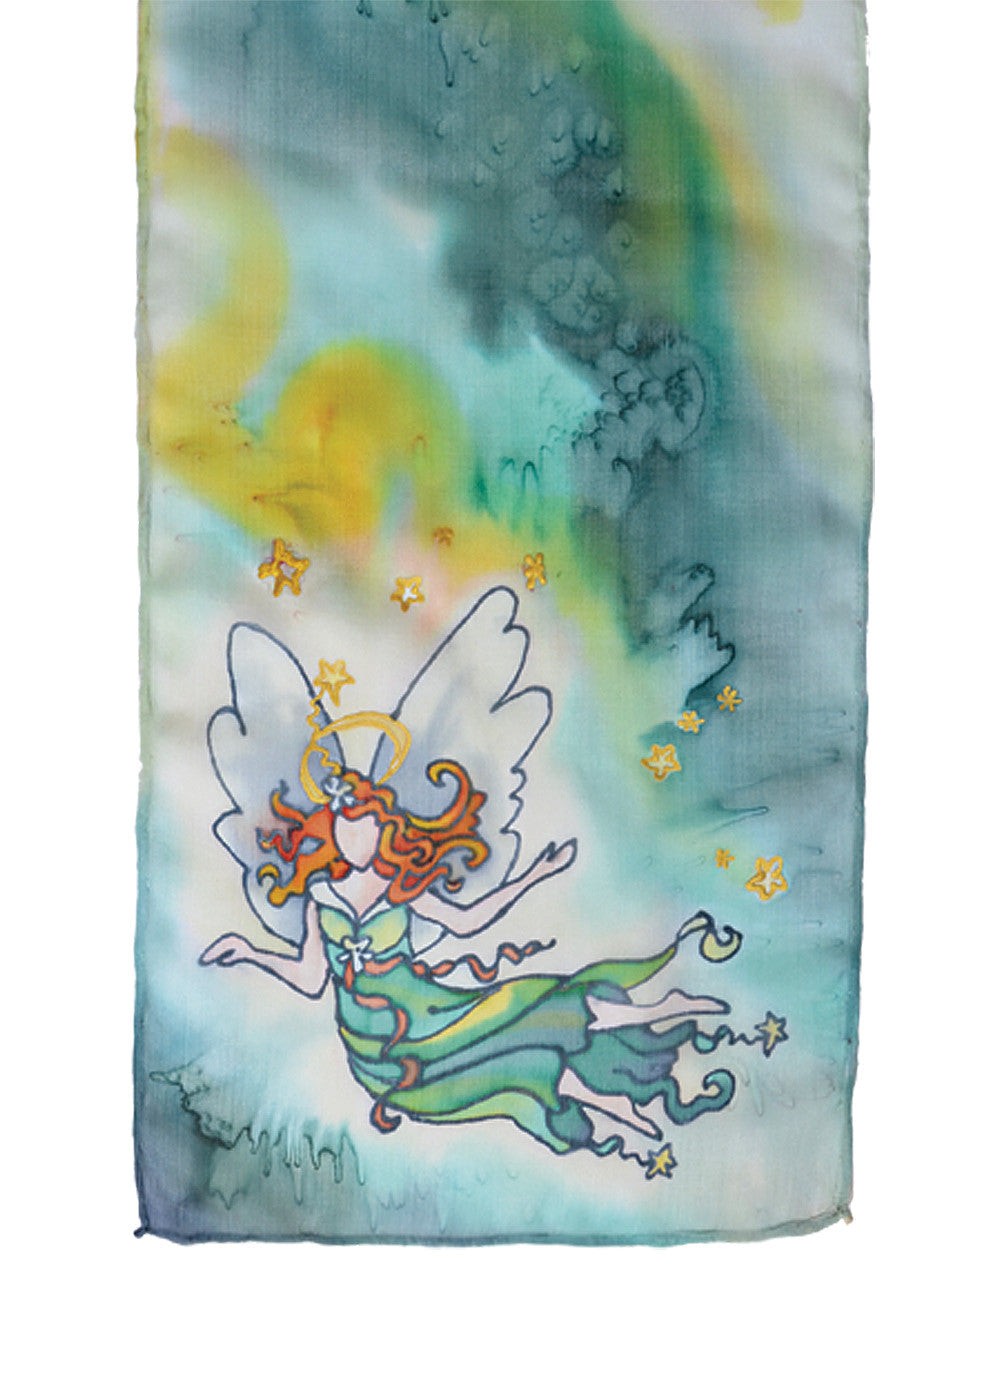 Hand-painted silk scarf green and yellow stardust angel design